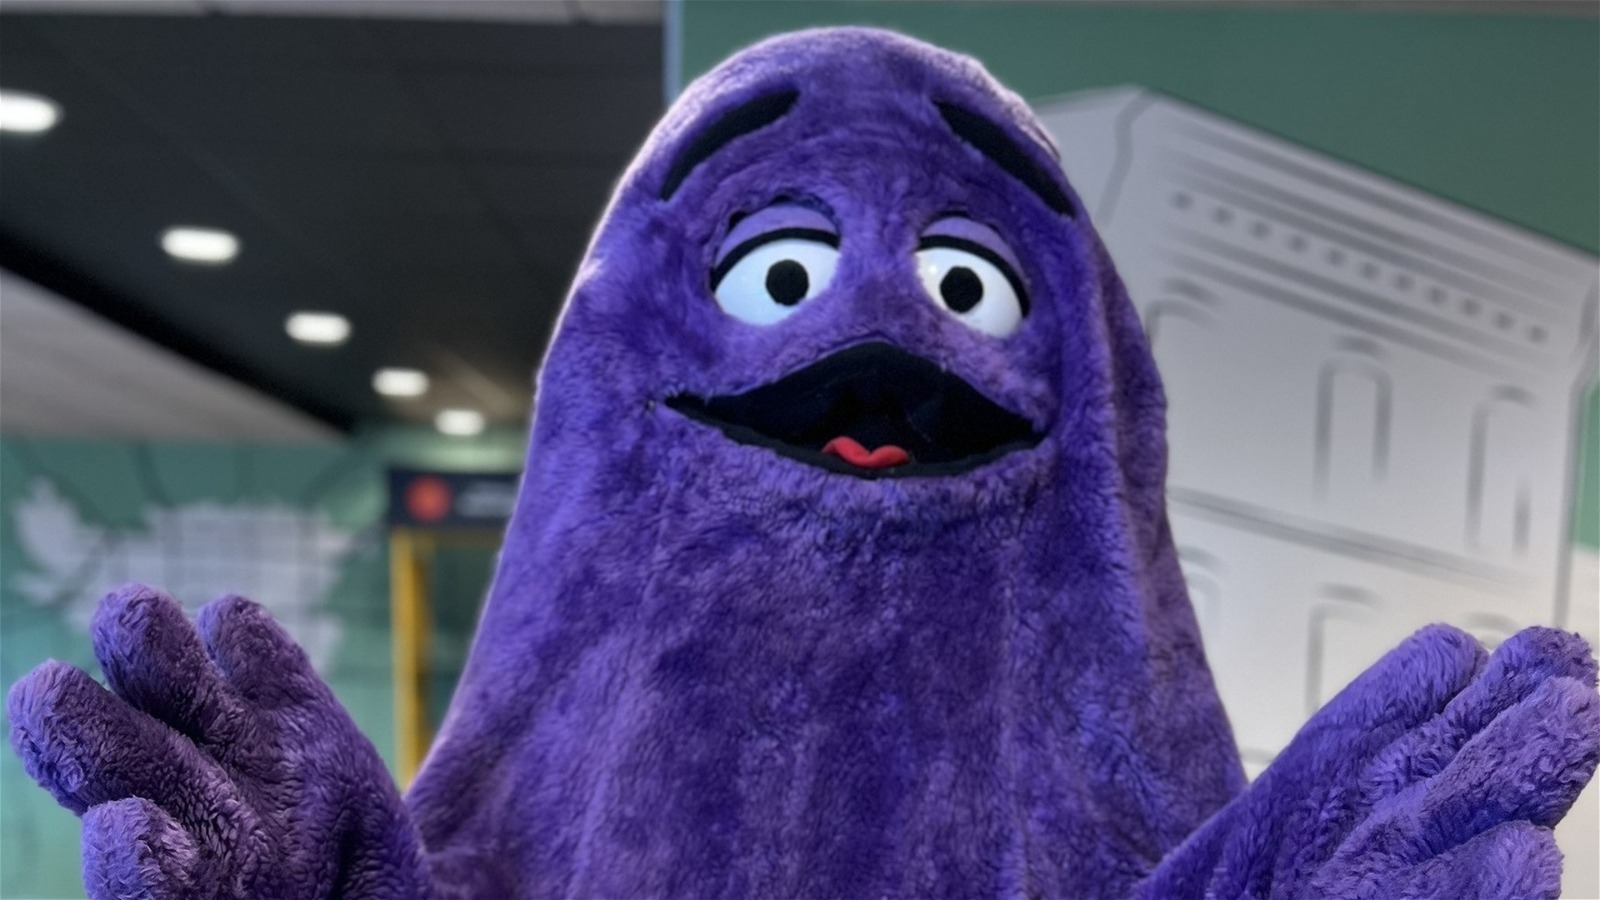 https://www.mashed.com/img/gallery/the-grimace-trend-was-bigger-than-anyone-could-imagine-even-mcdonalds/l-intro-1689363476.jpg